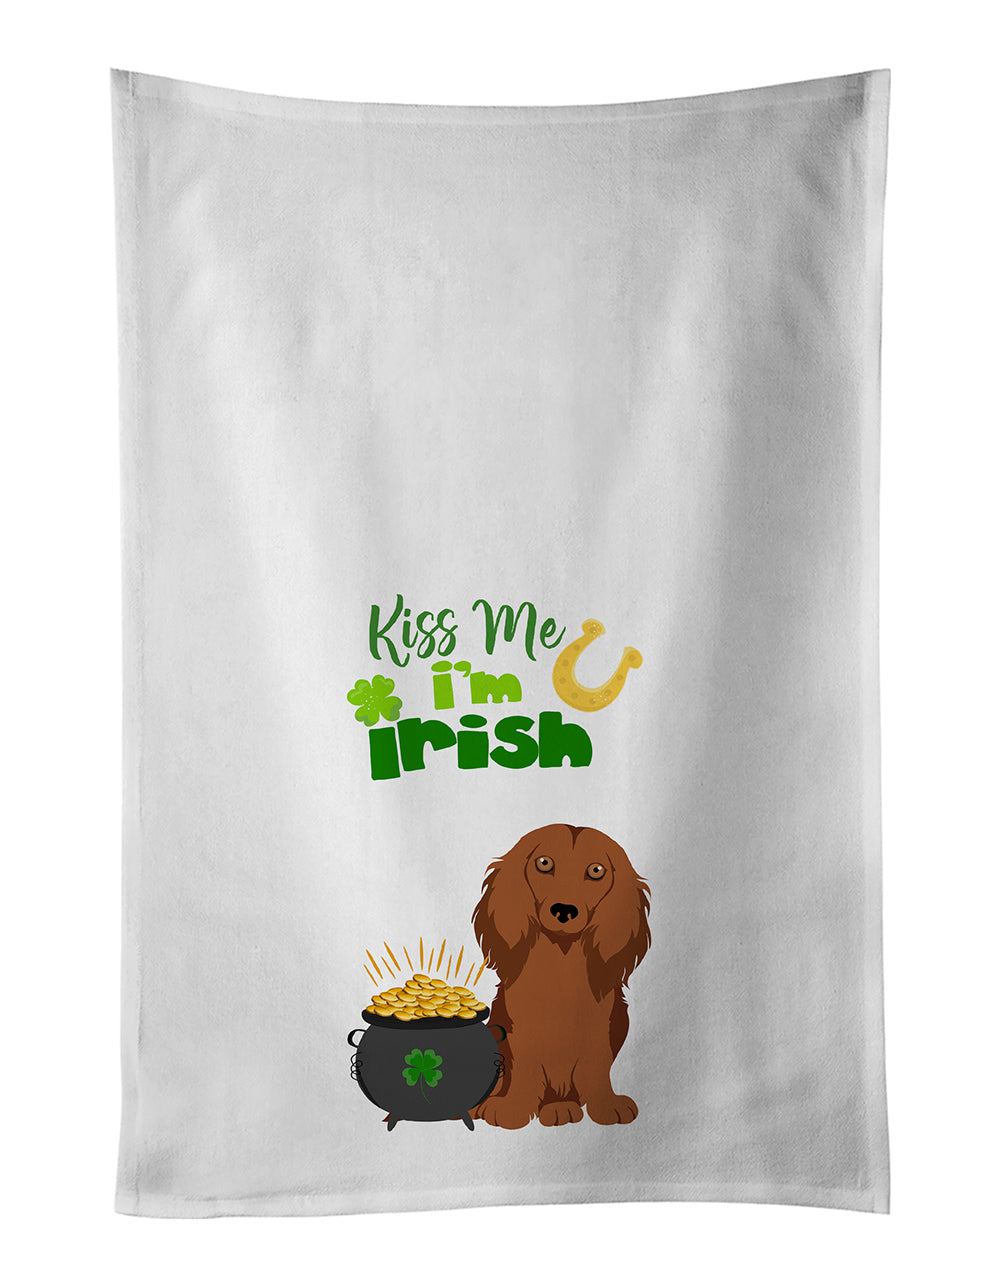 Buy this Longhair Red Dachshund St. Patrick's Day White Kitchen Towel Set of 2 Dish Towels